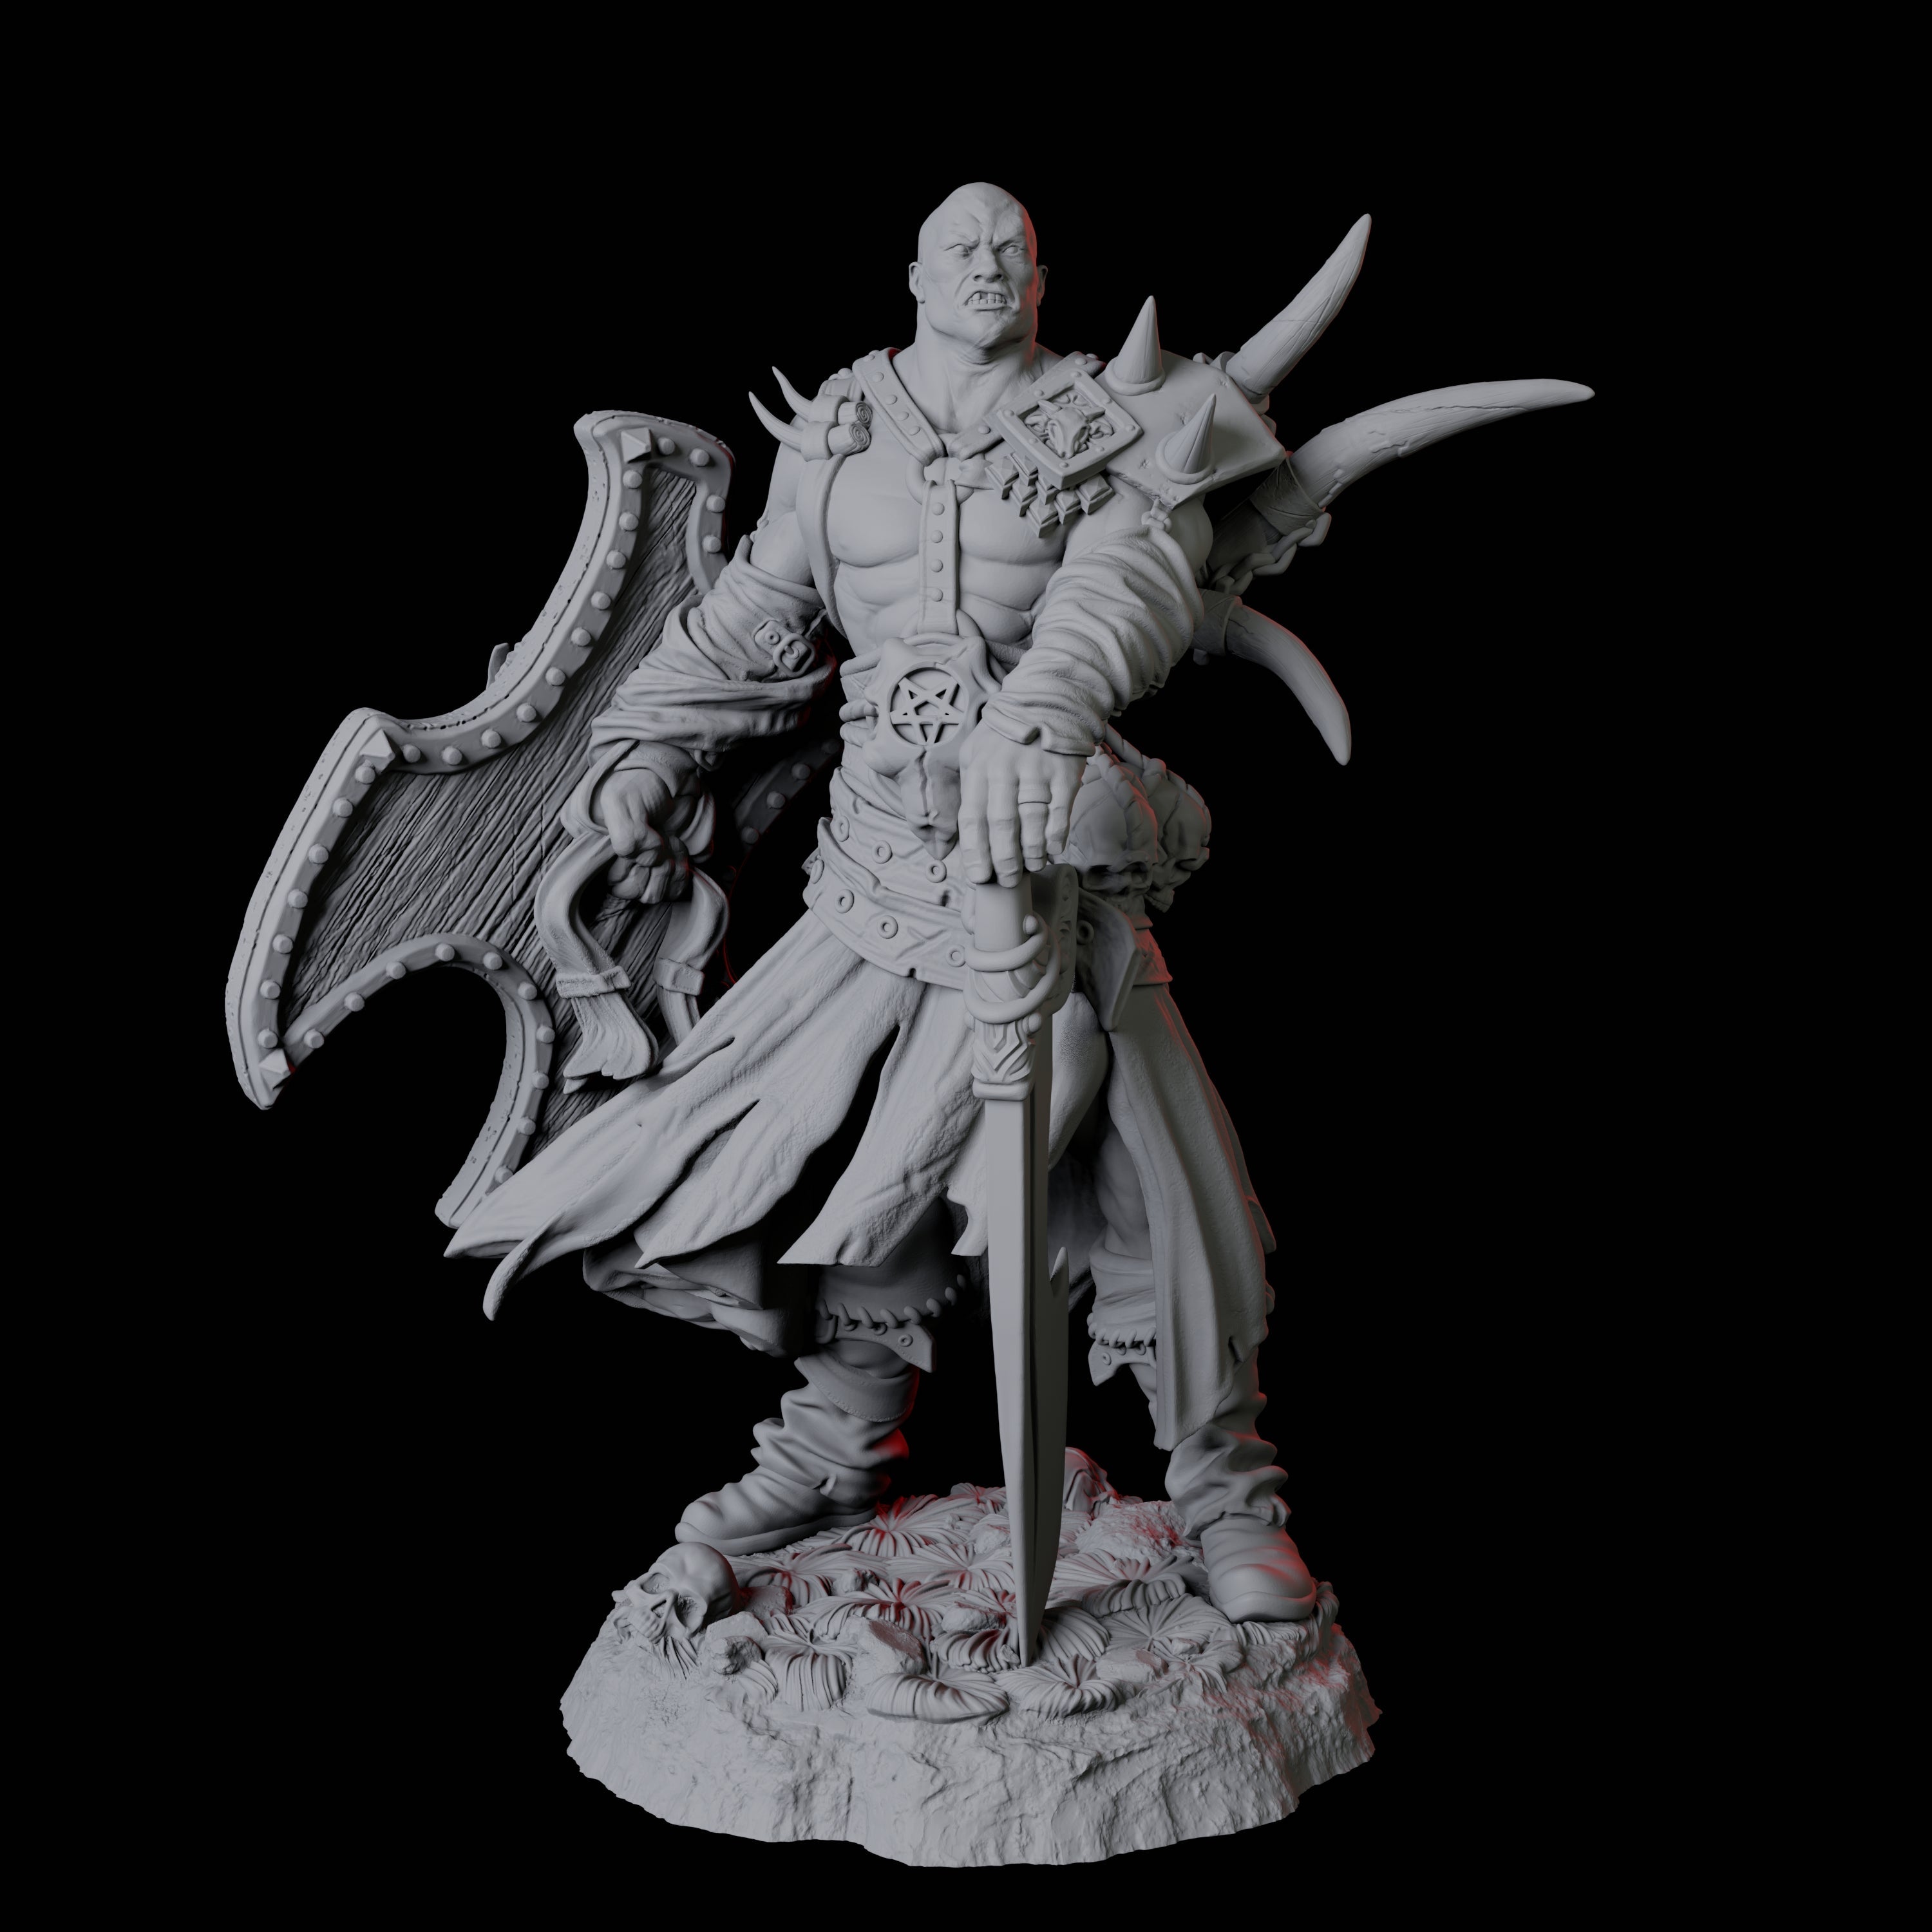 Calm Northman Barbarian Miniature for Dungeons and Dragons, Pathfinder or other TTRPGs